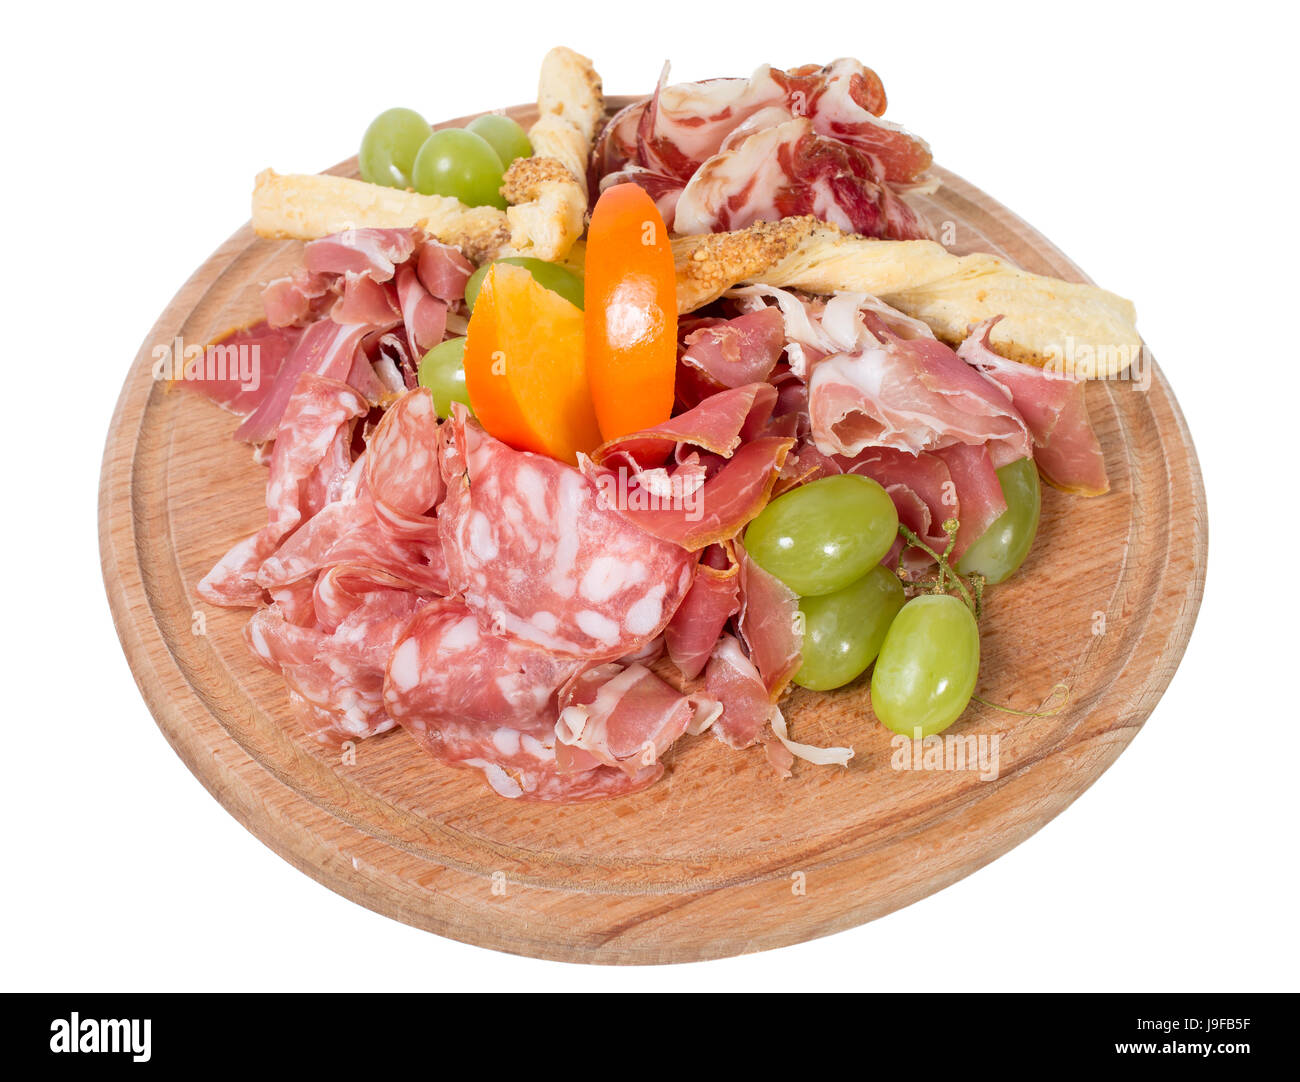 Mixed italian dried meats platter with croutons and grapes. Isolated on a white background. Stock Photo